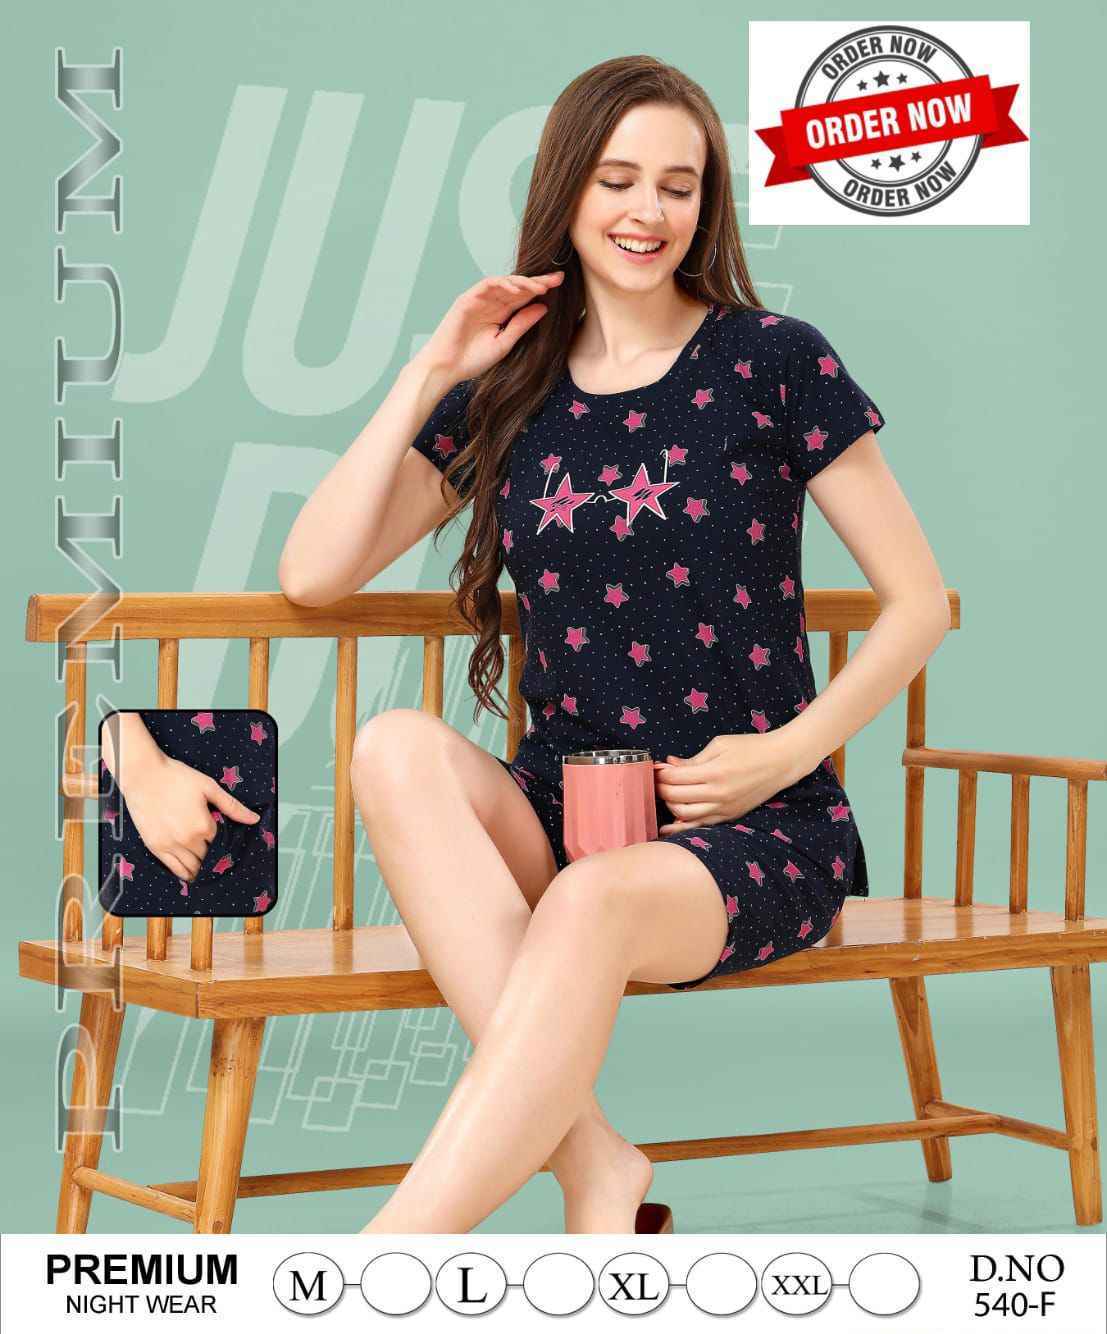 Summer Special Night Shorts With Pocket Hosiery Cotton Night Suits 6 Pc Catalog